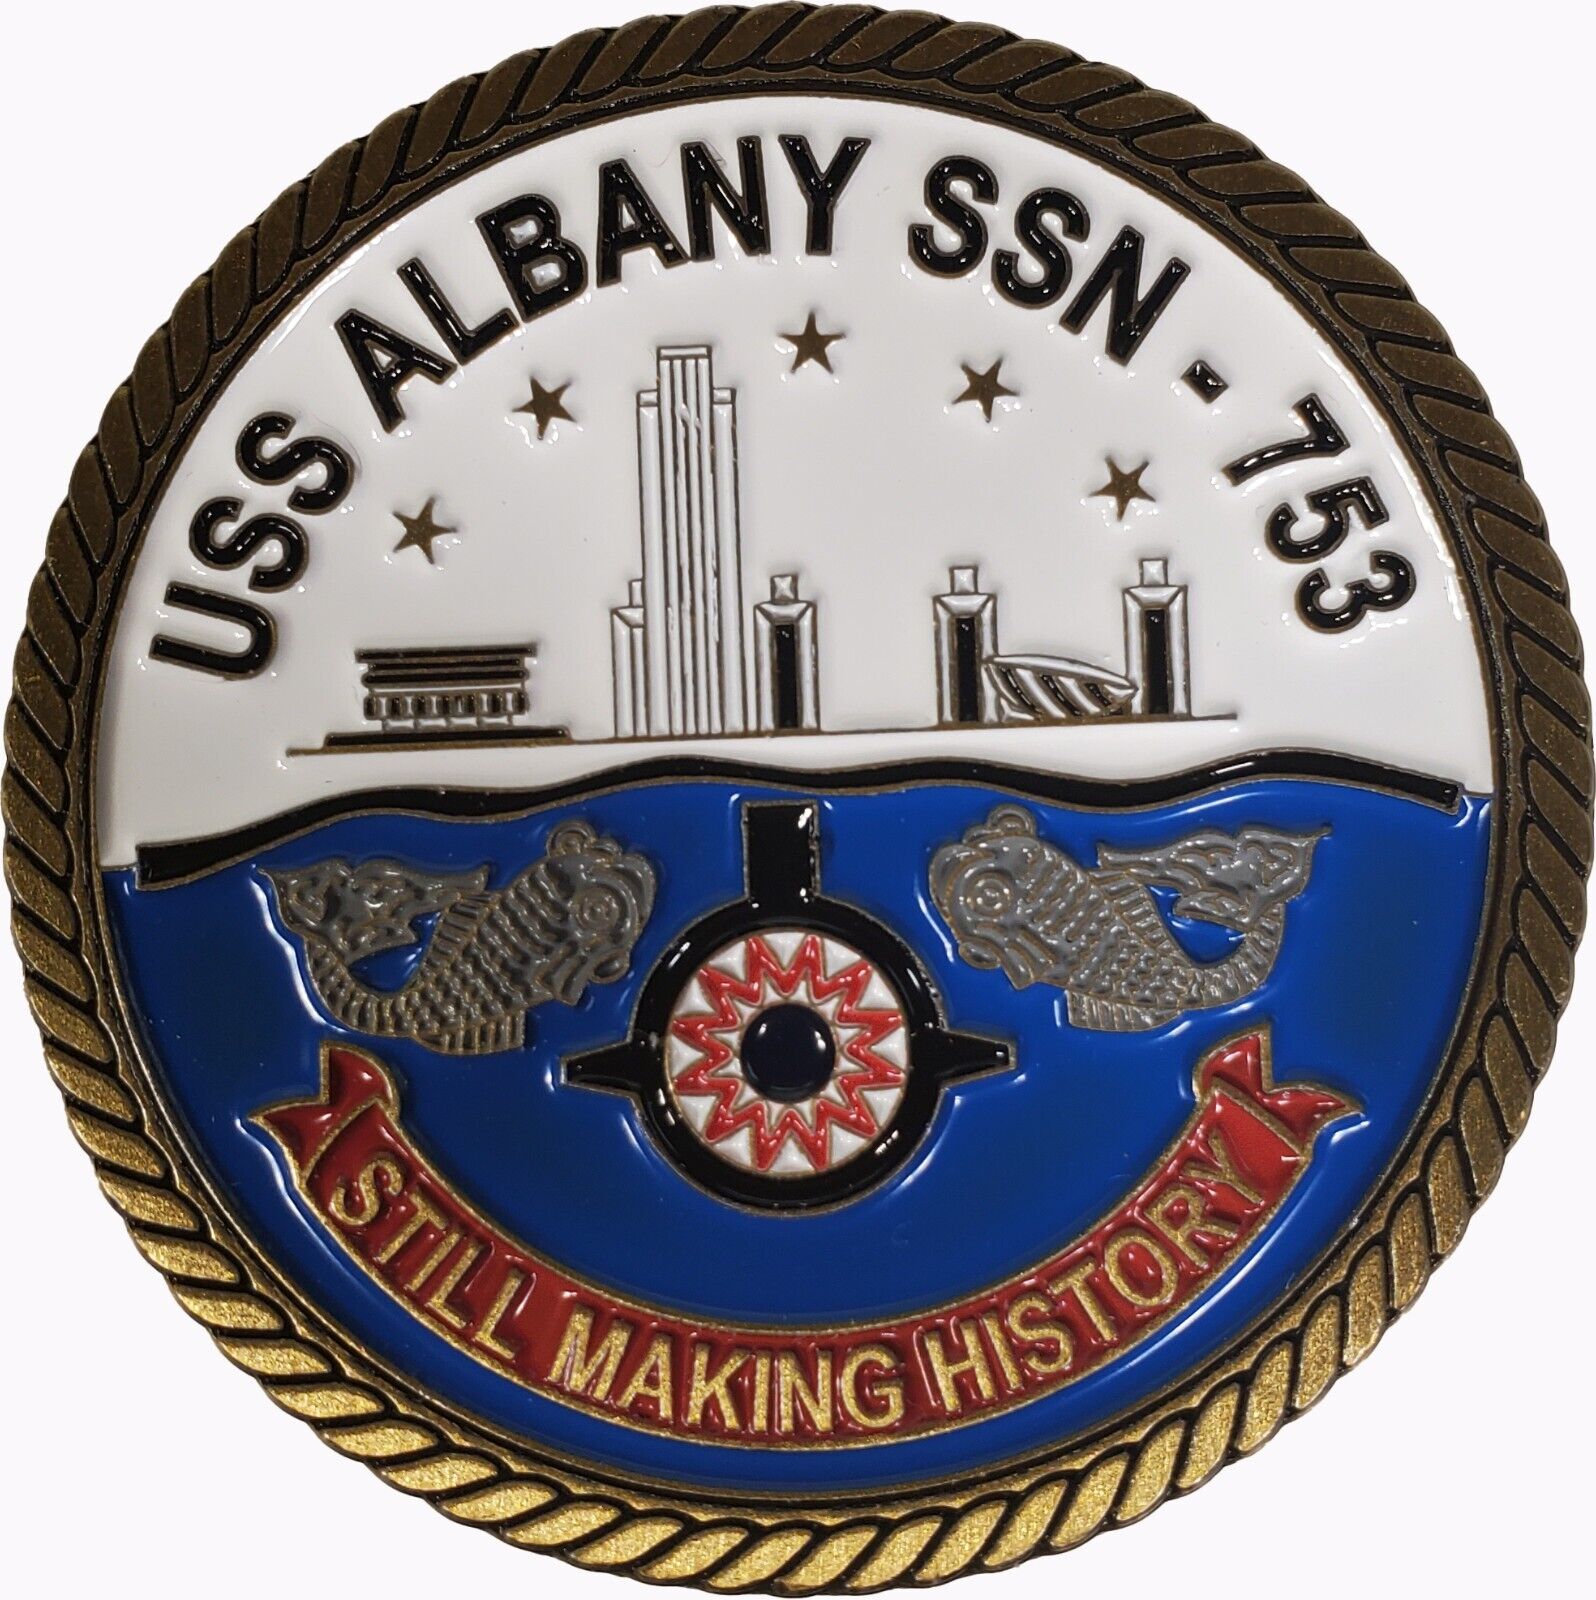 US Navy USS Albany SSN-753 Submarine Commemorative Challenge Coin 182